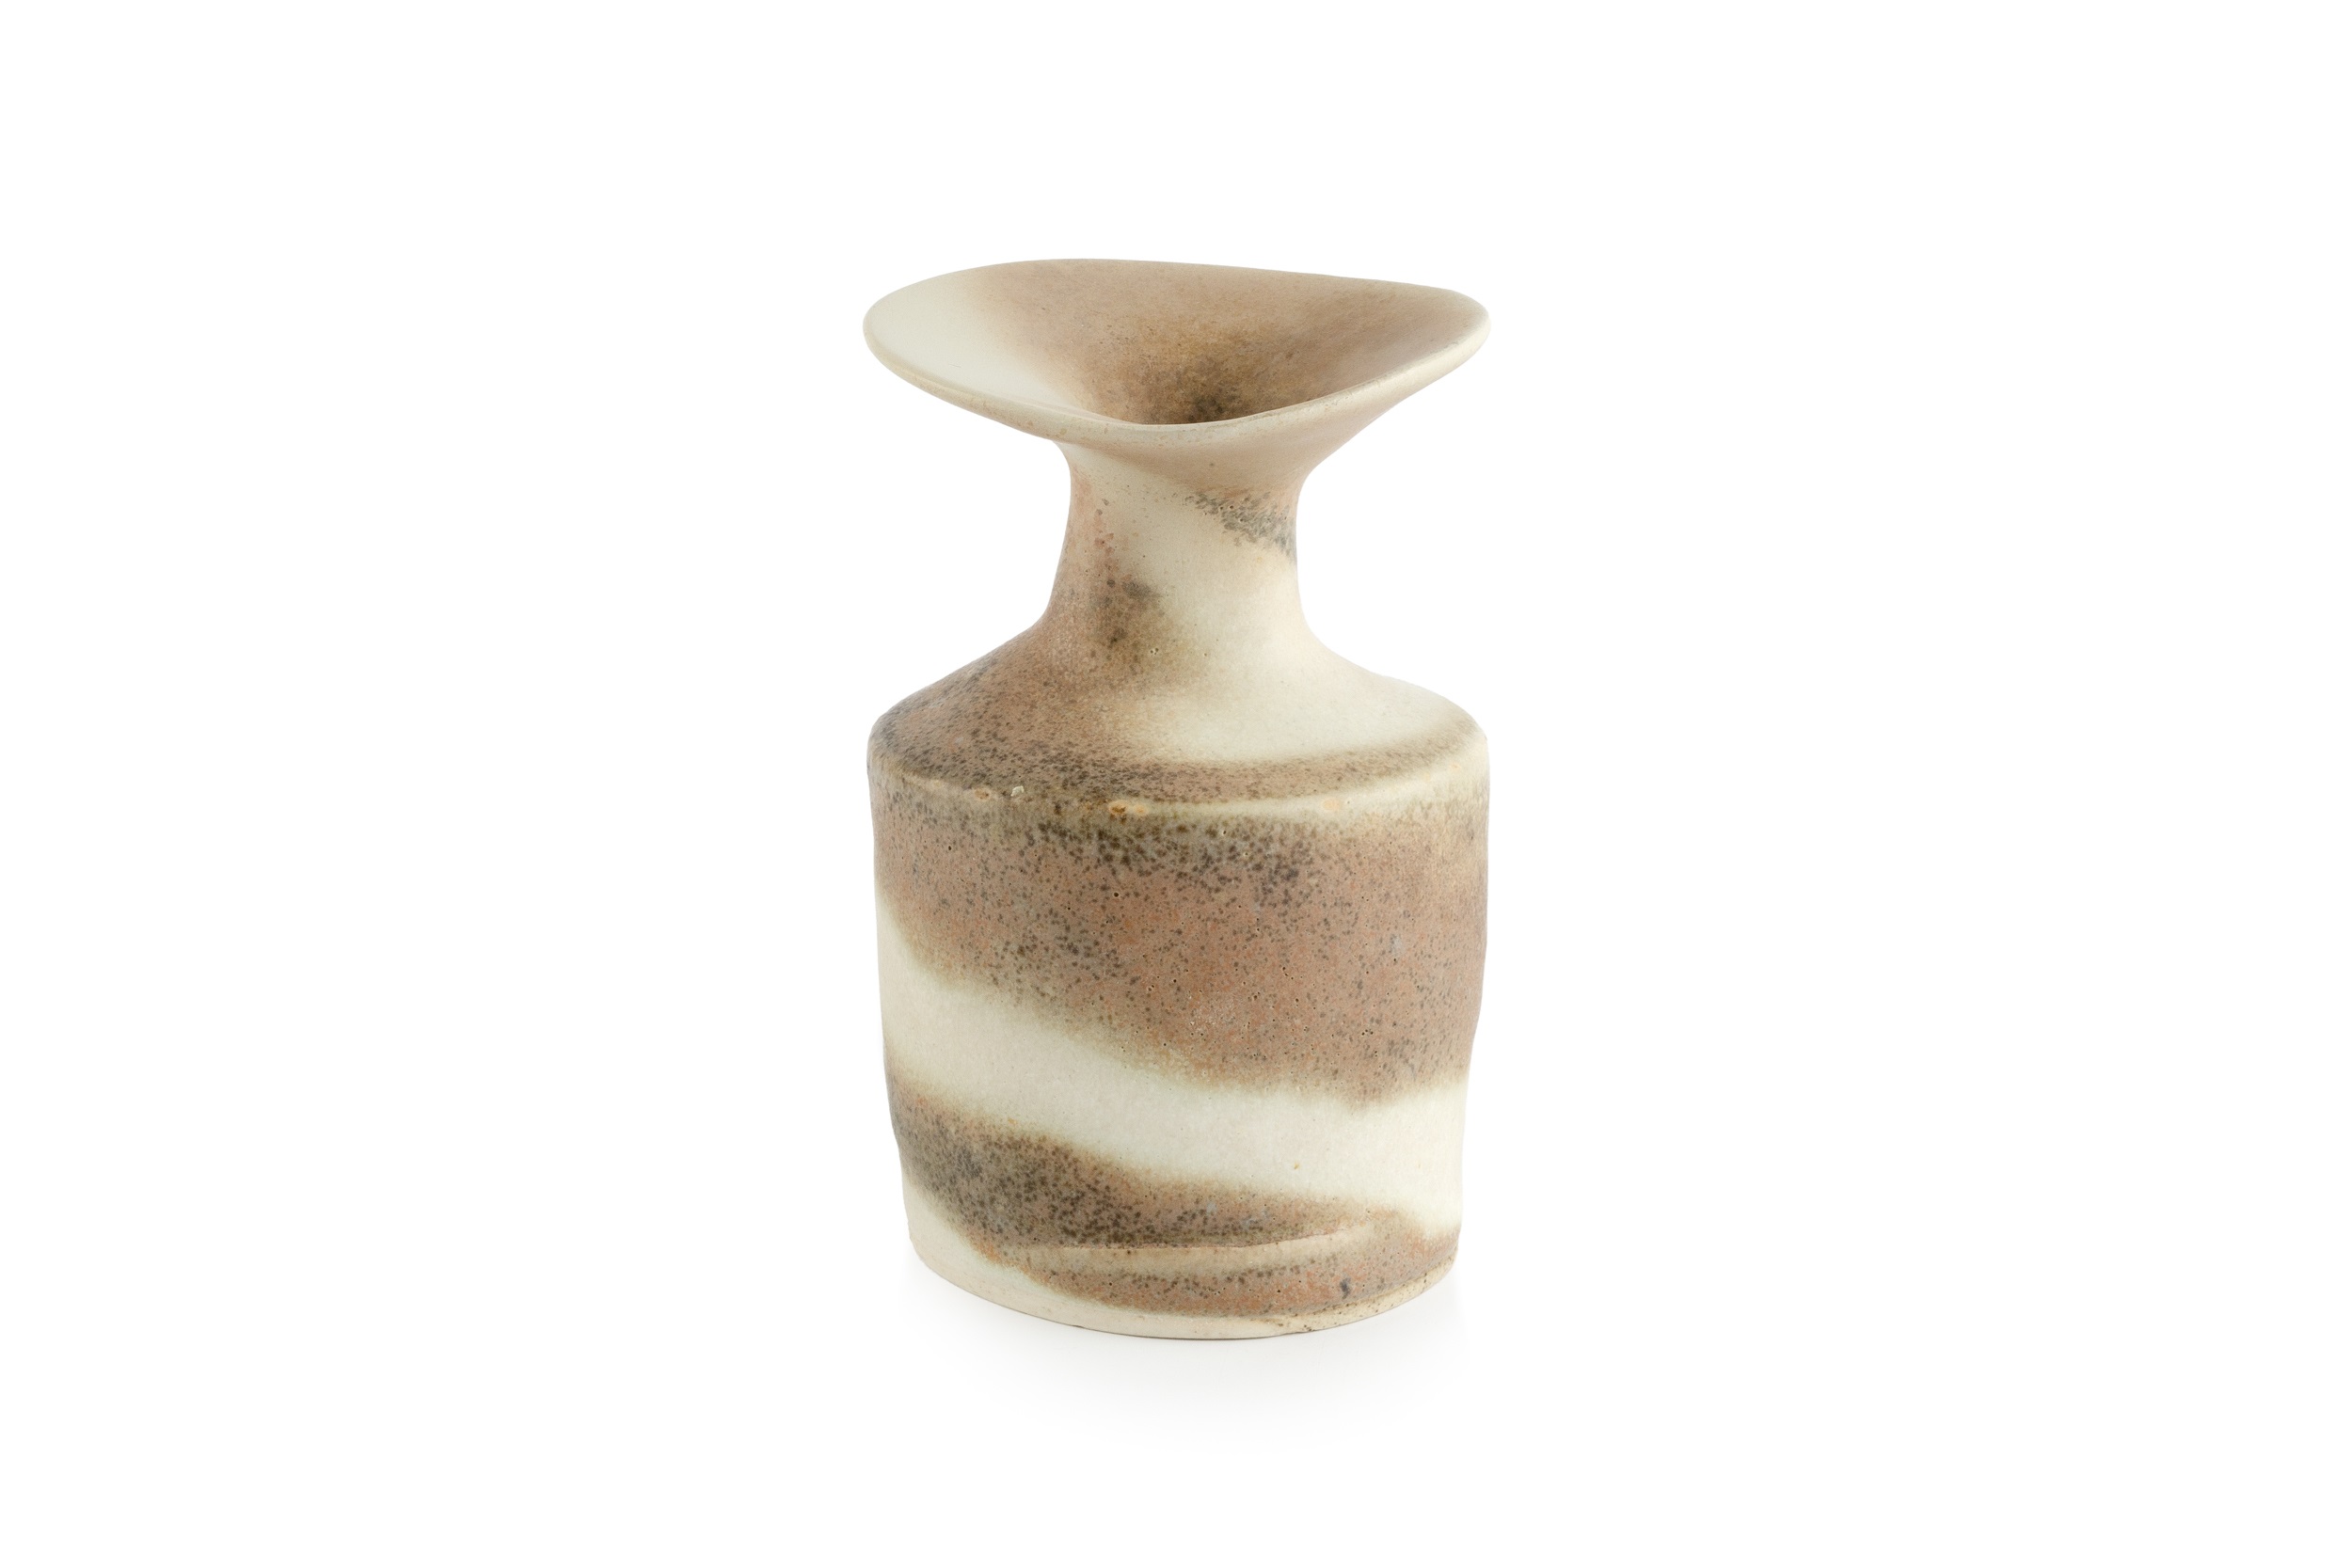 Lucie Rie (1902-1995) Vase swirled pale glazes impressed potter's seal 12.2cm high.